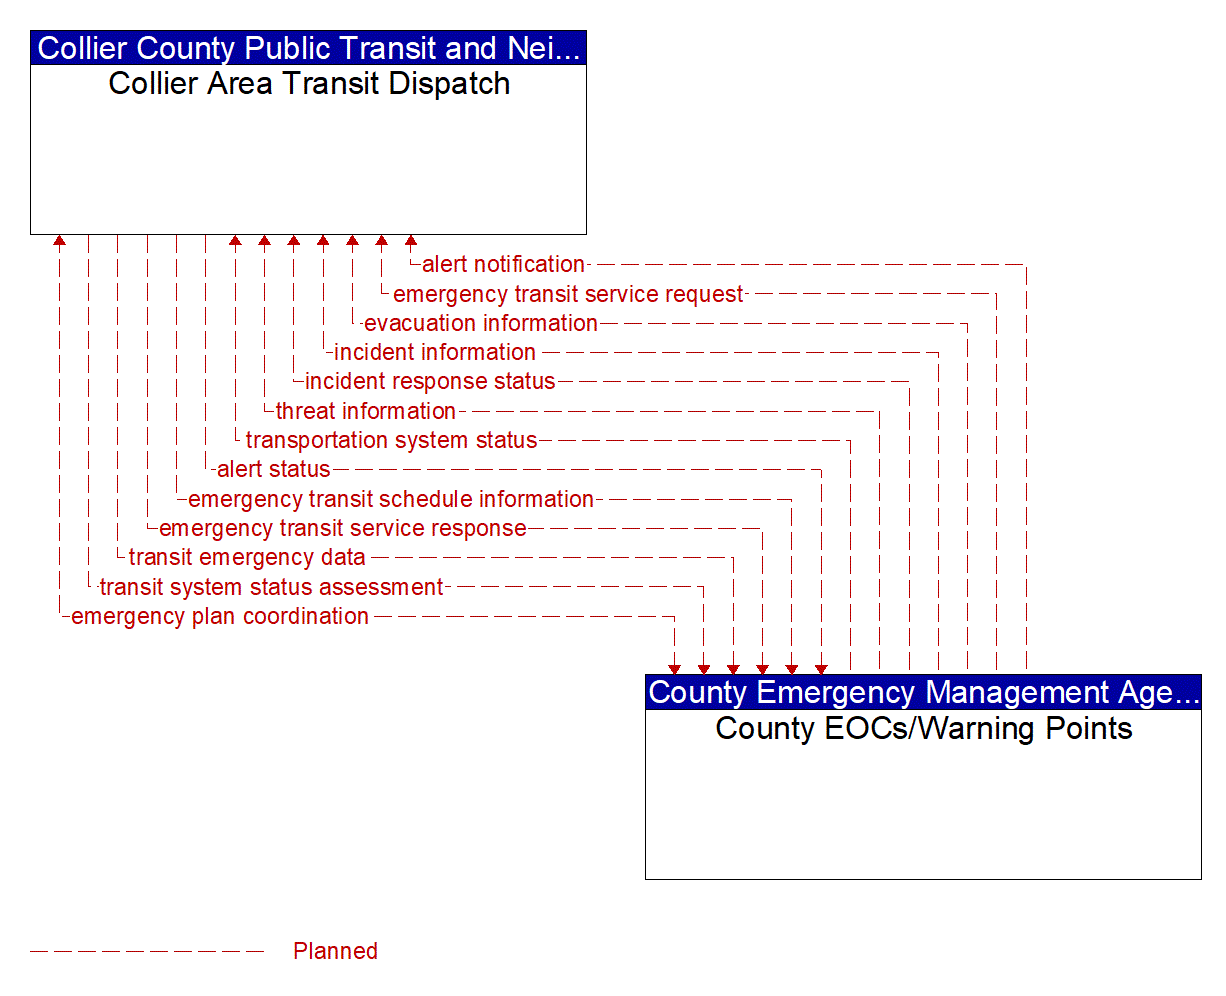 Architecture Flow Diagram: County EOCs/Warning Points <--> Collier Area Transit Dispatch